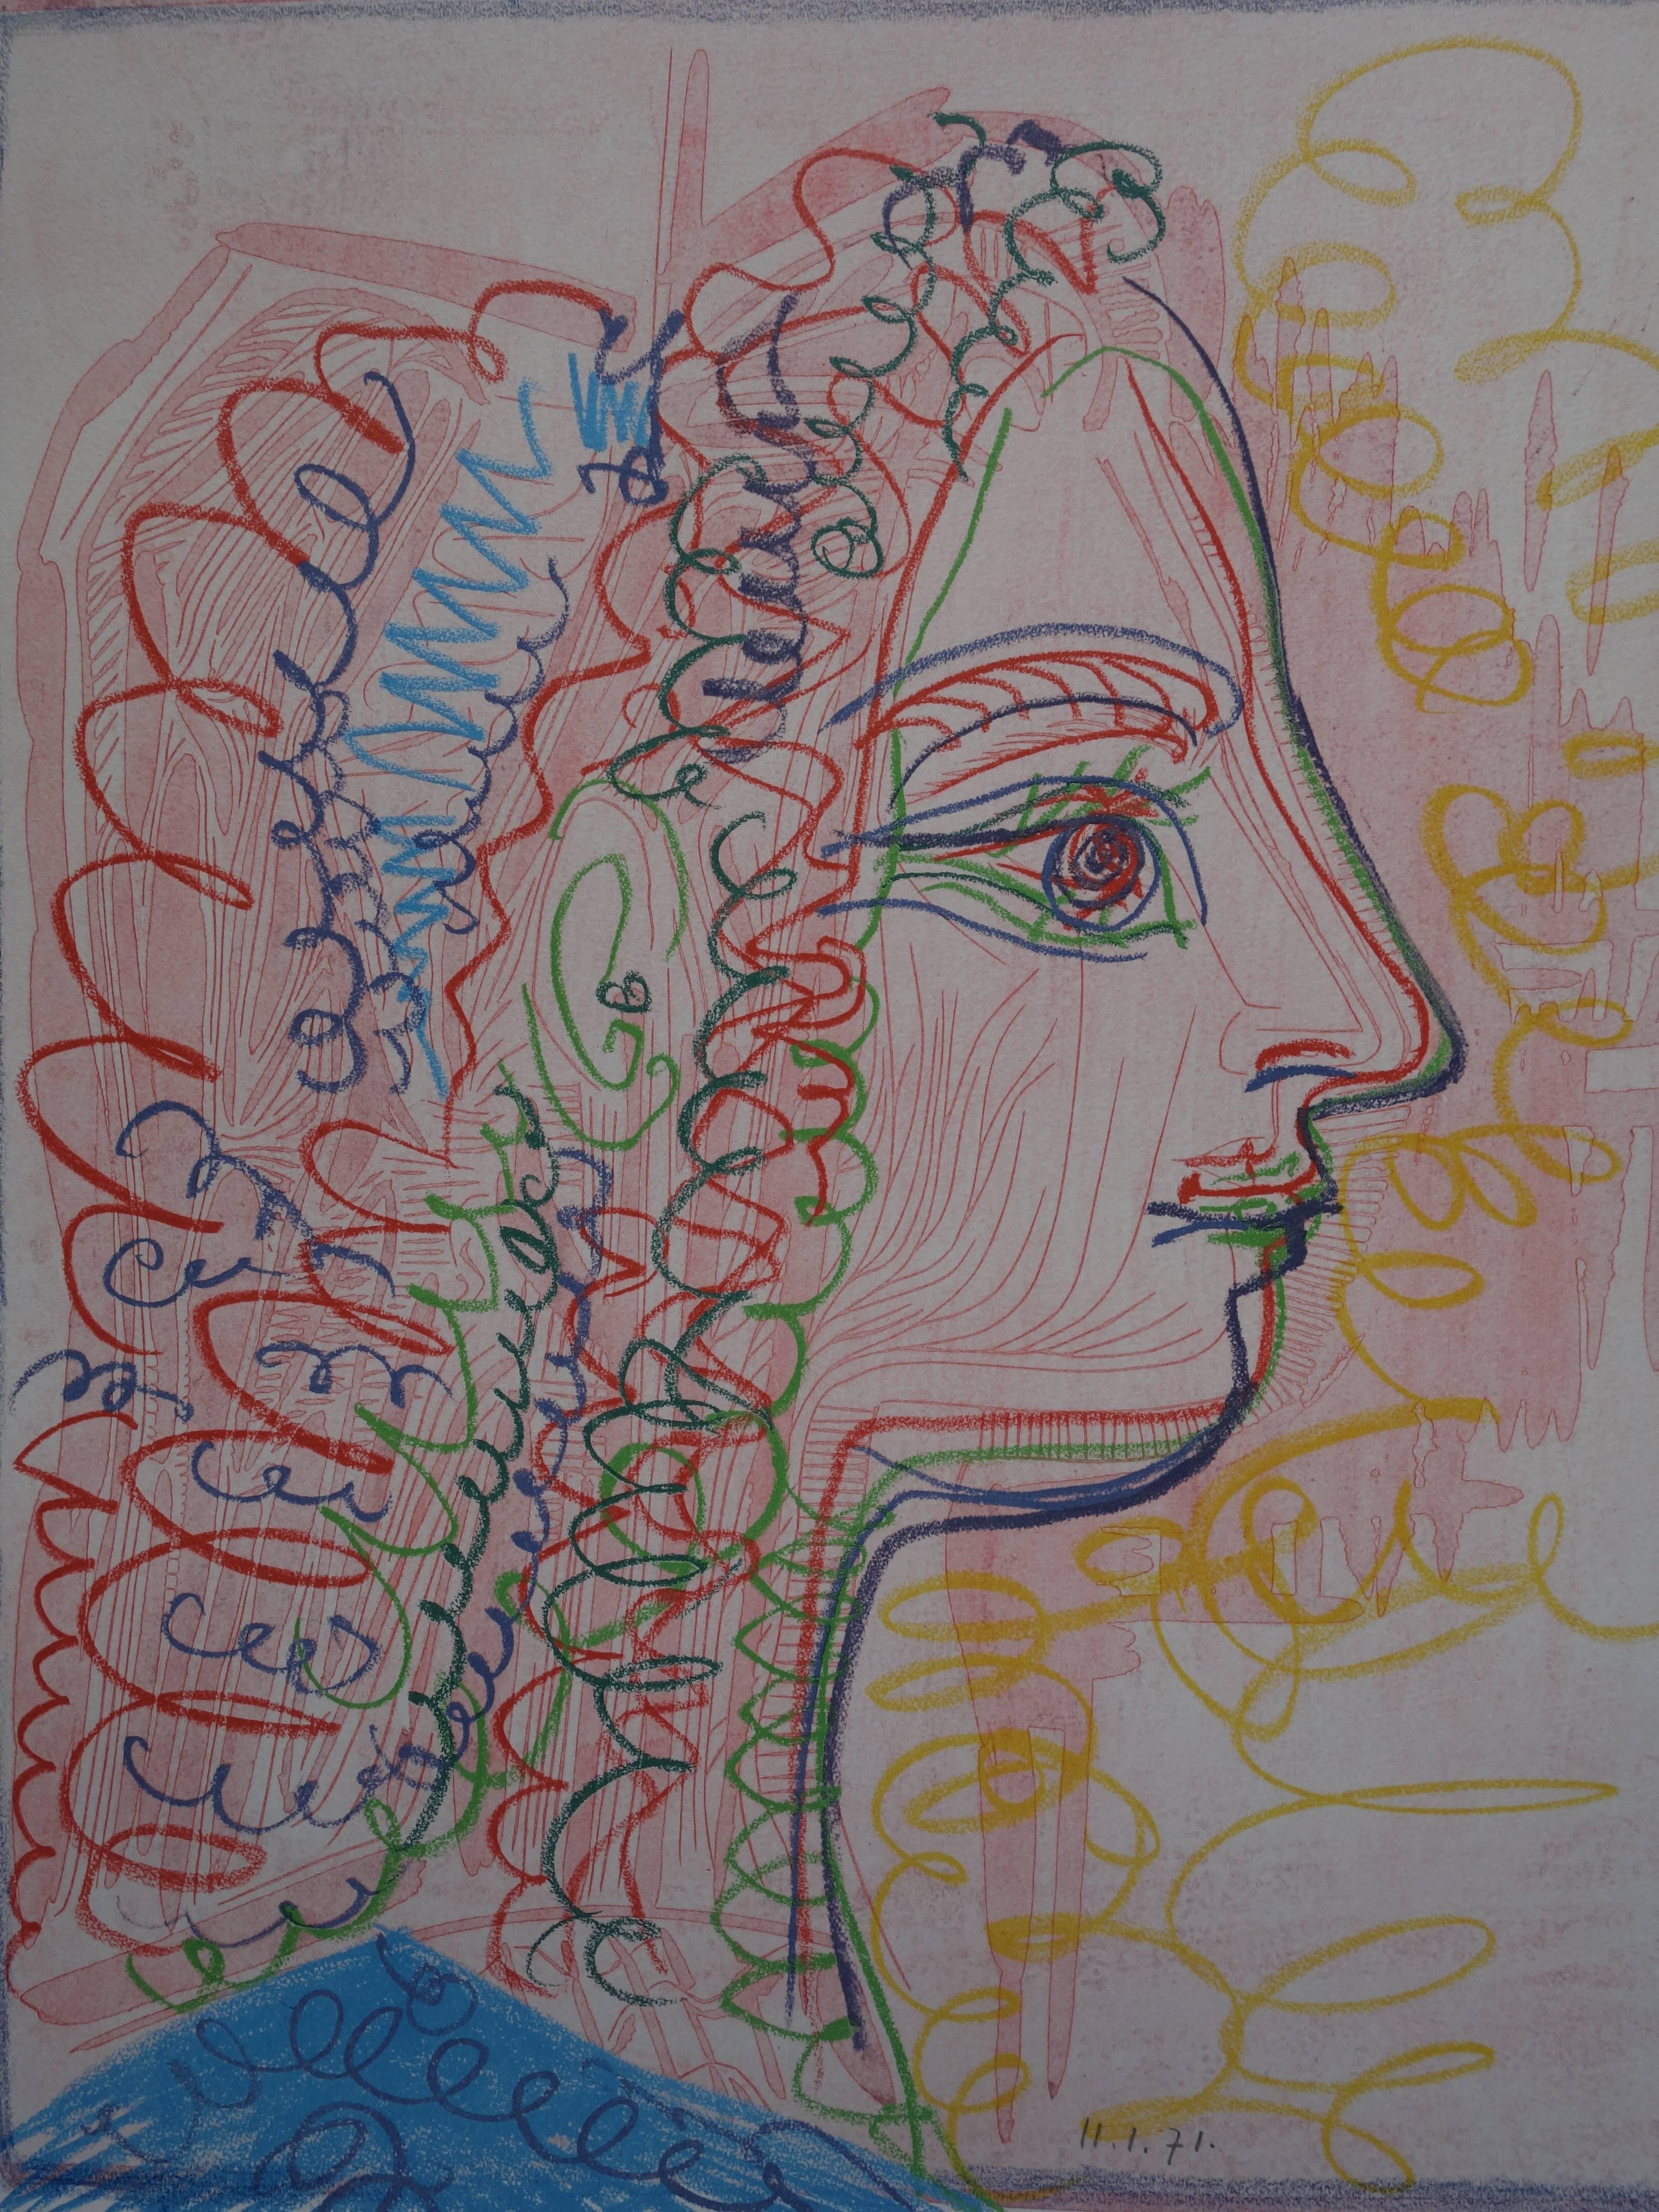 Pablo PICASSO 
Woman Profile in Blue and Pink

Stone lithograph based on a drawing in wax pastel by the artist
Signed & dated in pencil
From an edition of 70 copies
Edited by Decorative Arts Museum of Lausanne, Switzerland 
Authenticated by the